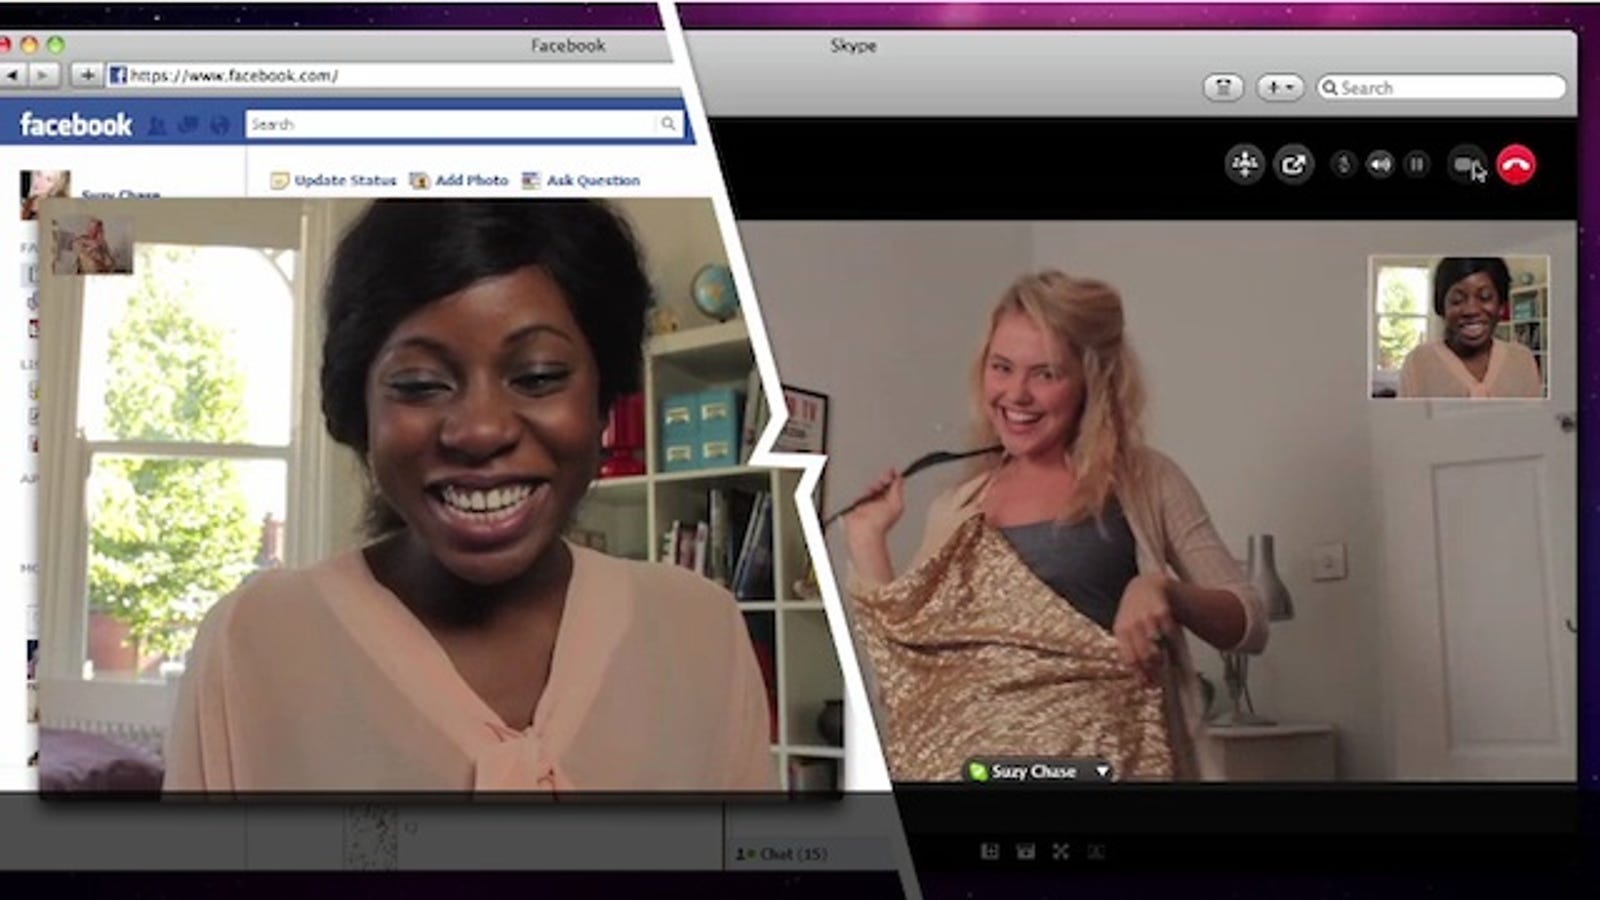 Skype Adds Facebook Video Chat